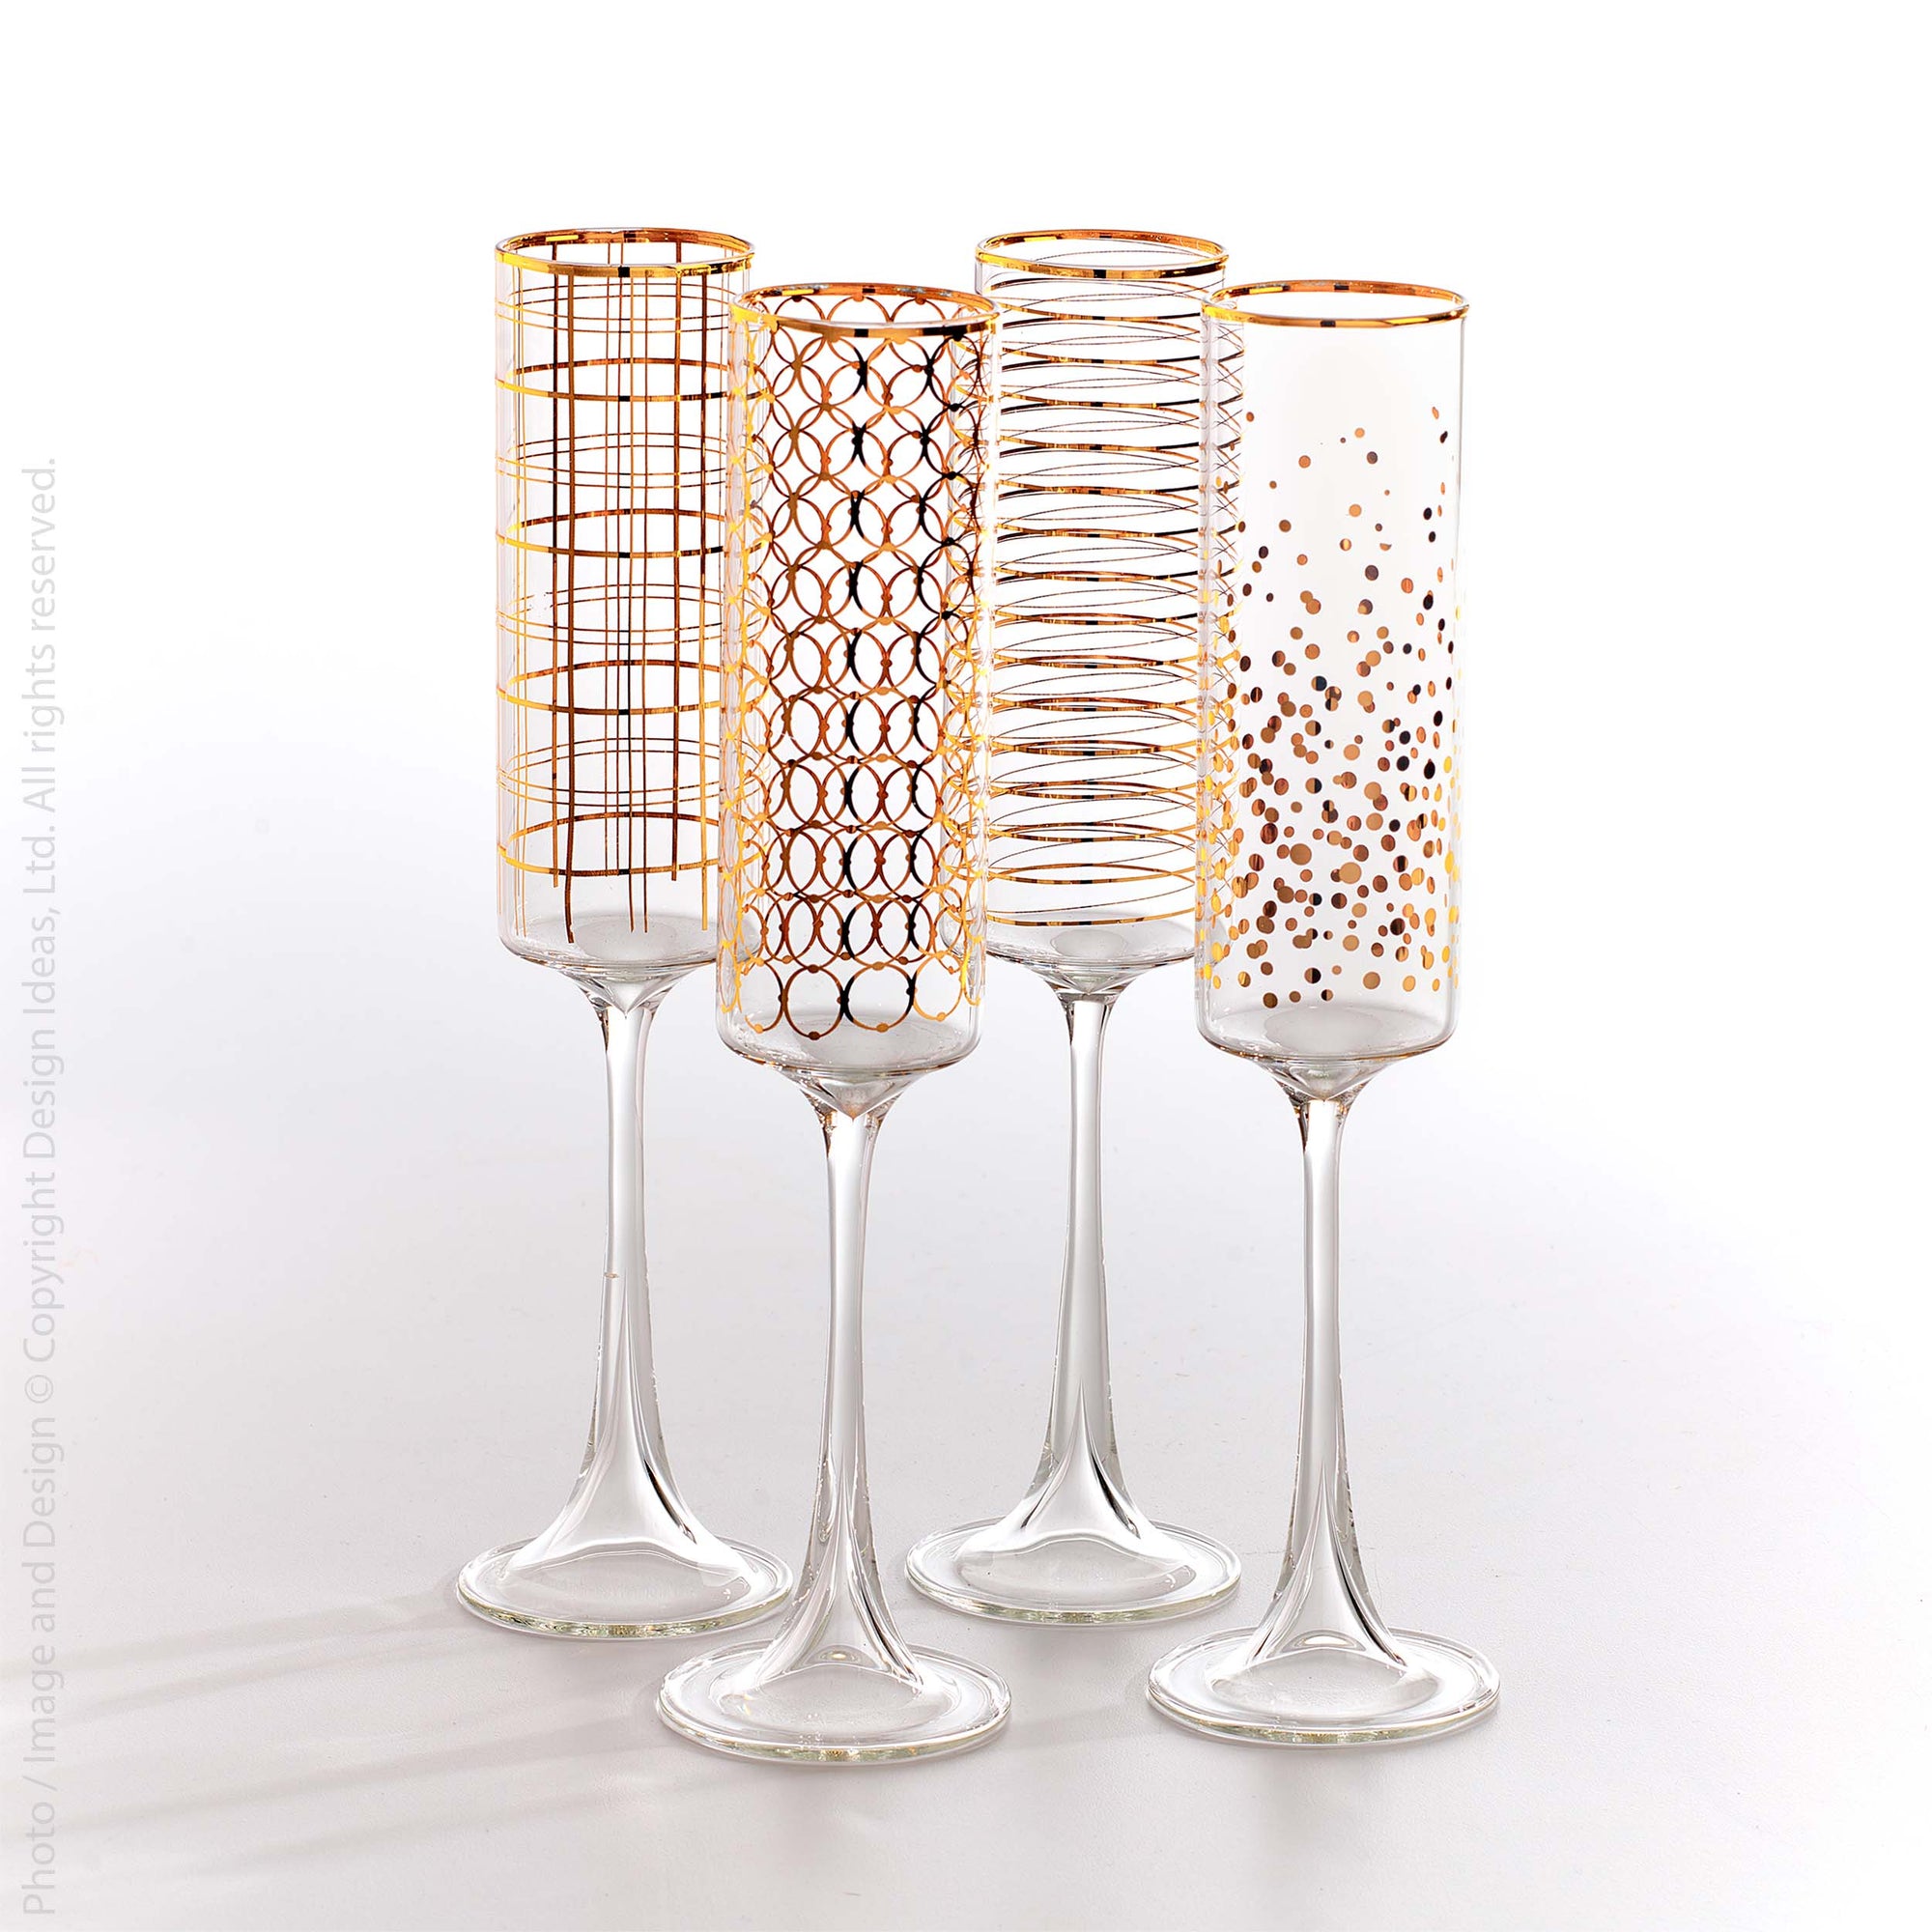 Kyra™ champagne flute (set of 4)